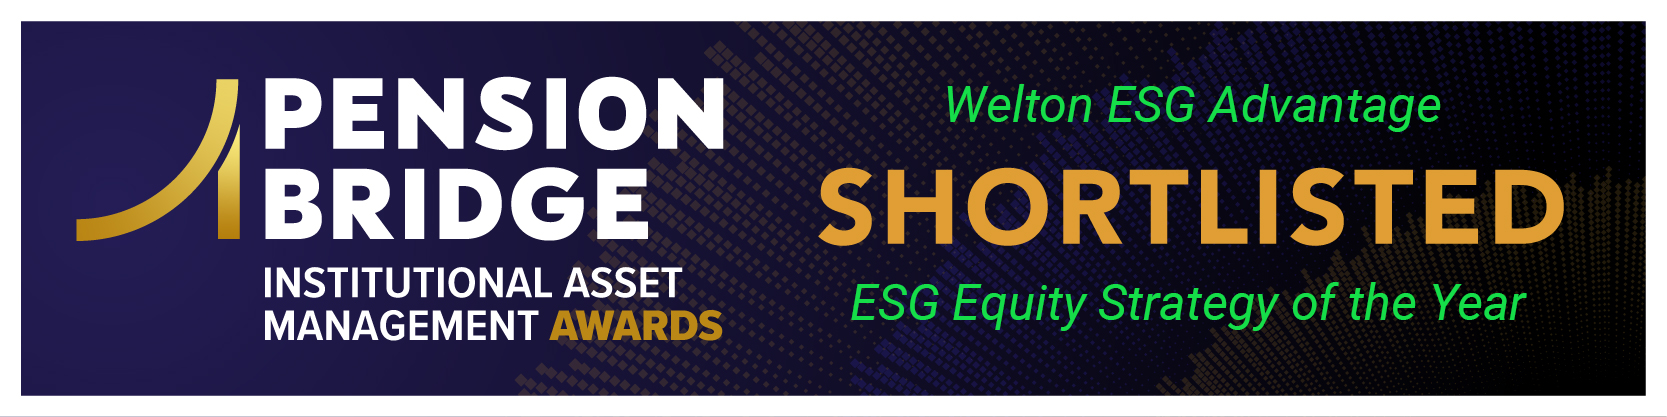 Welton ESG Advantage Shortlisted for “ESG Equity Strategy of the Year”